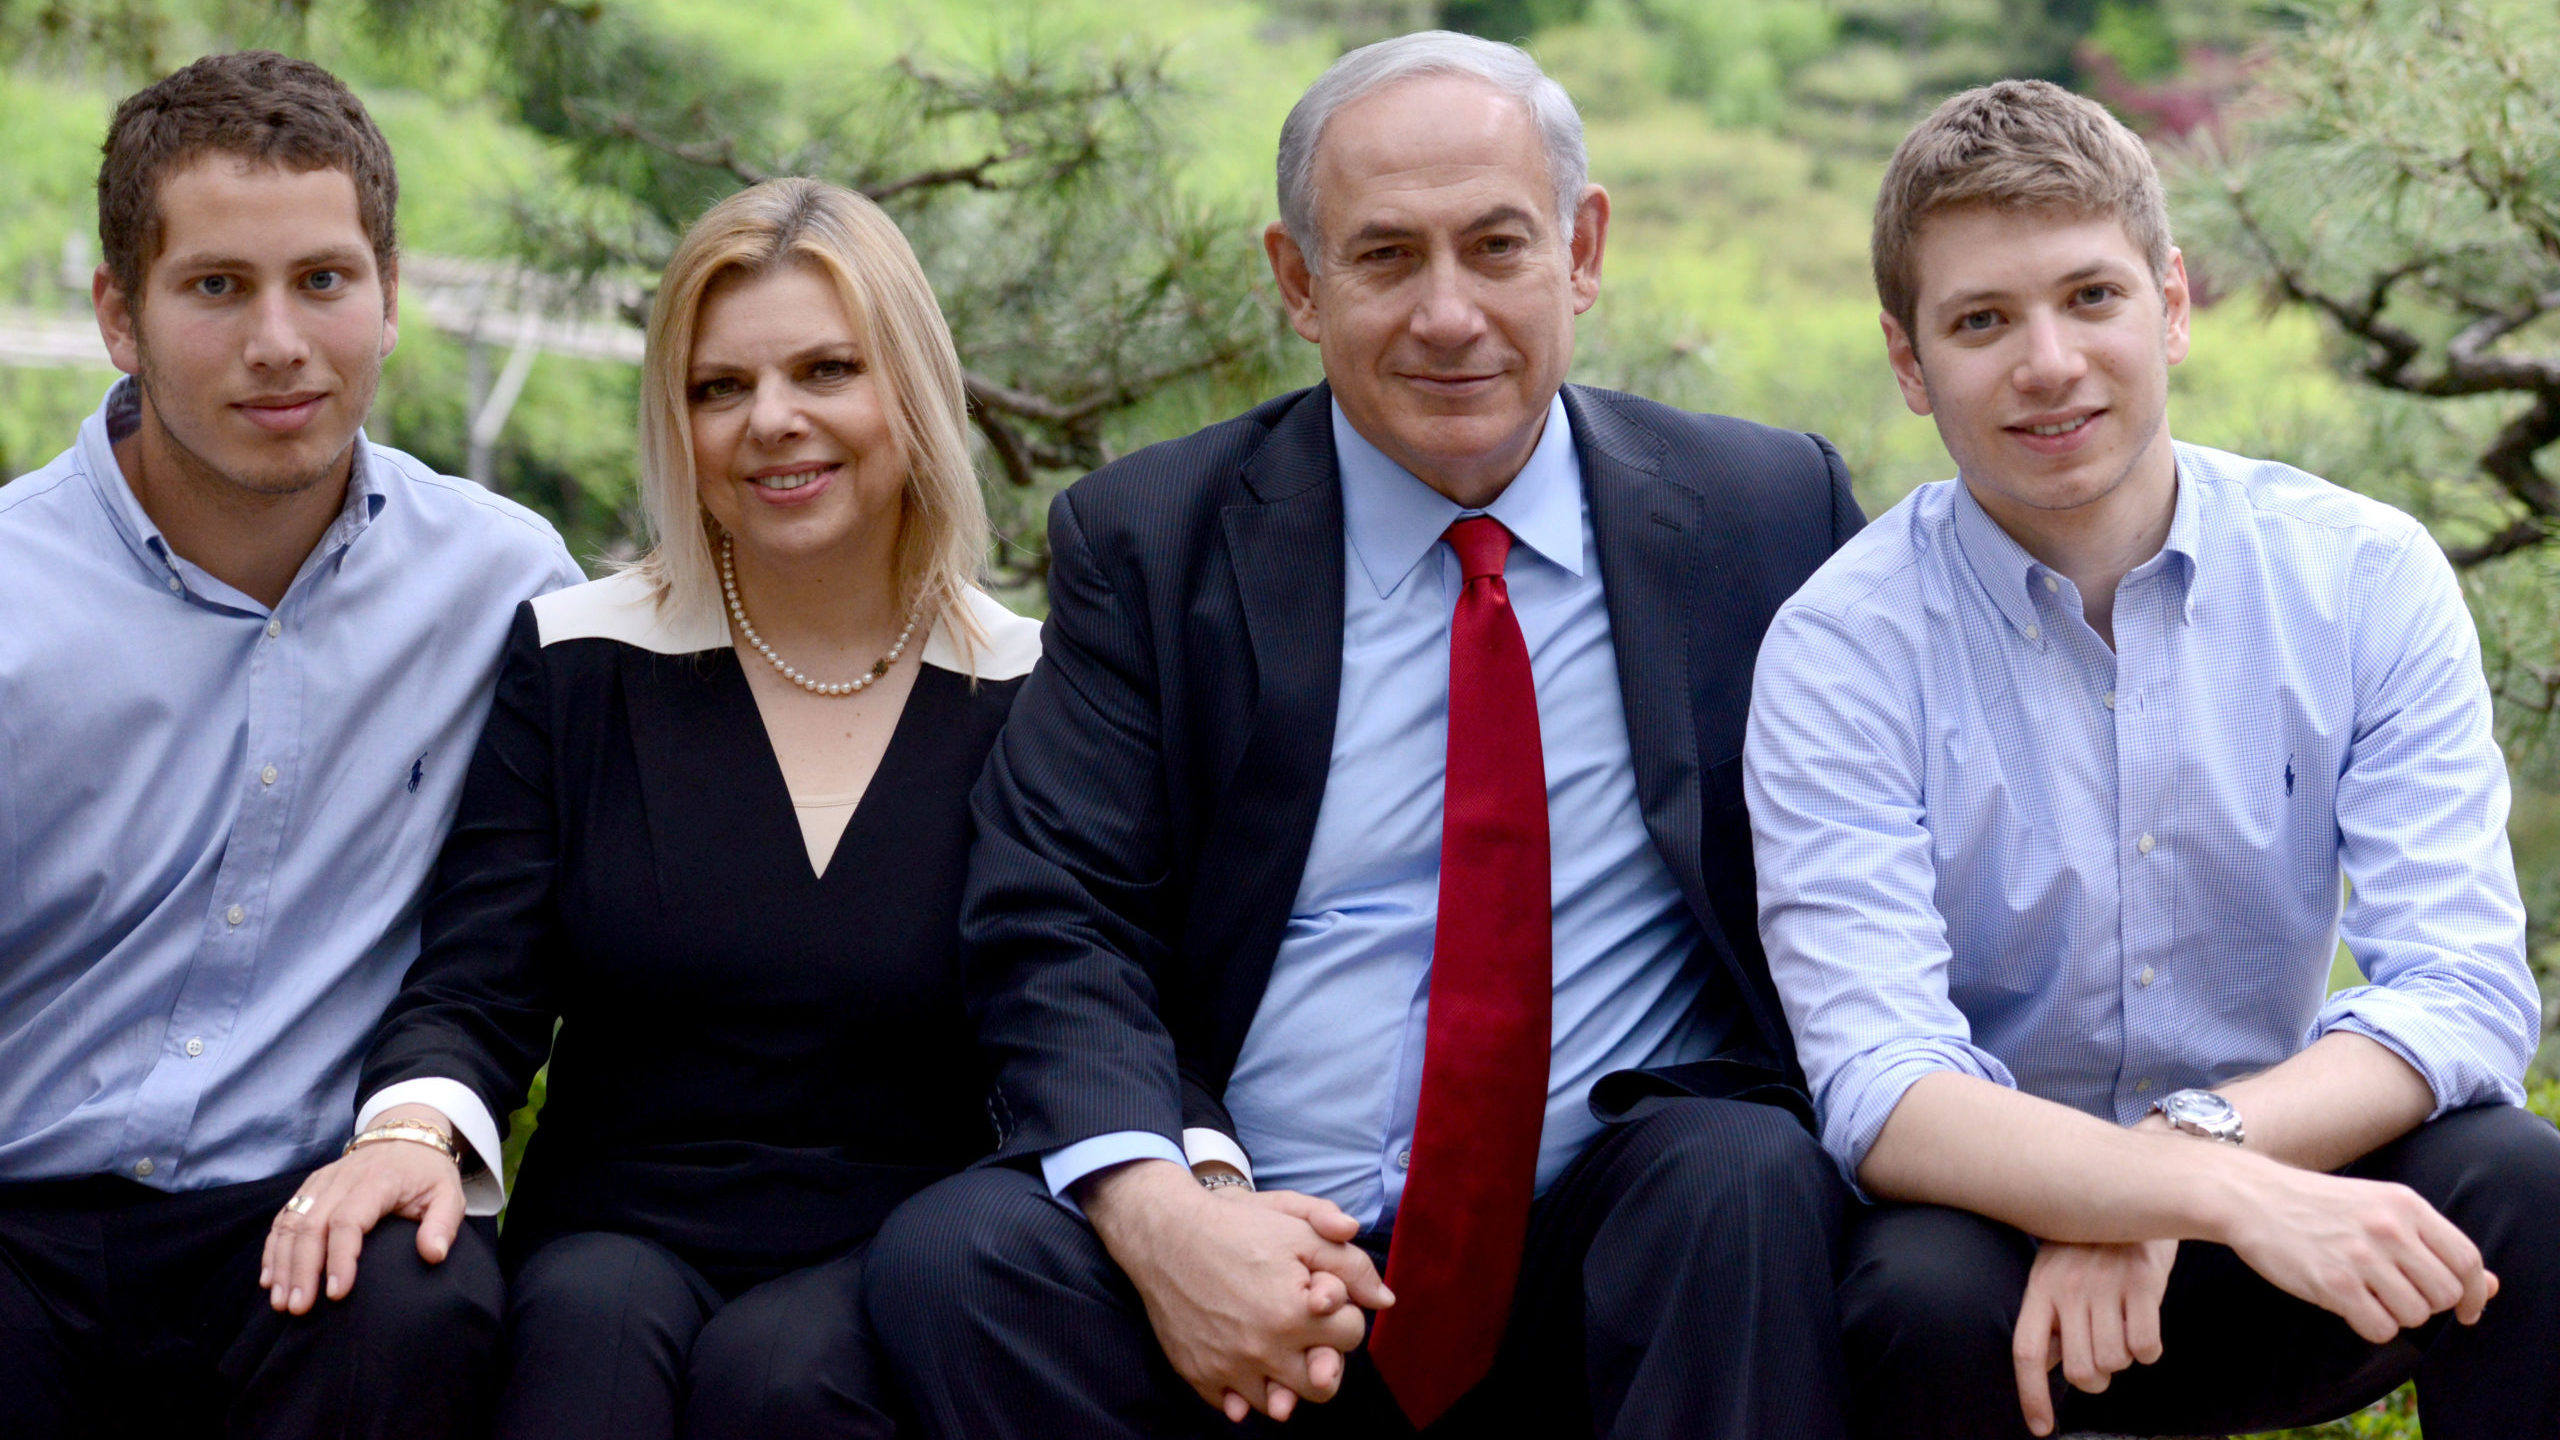 6 Months After Netanyahu Left Office, Security Detail Dropped for Wife, Sons